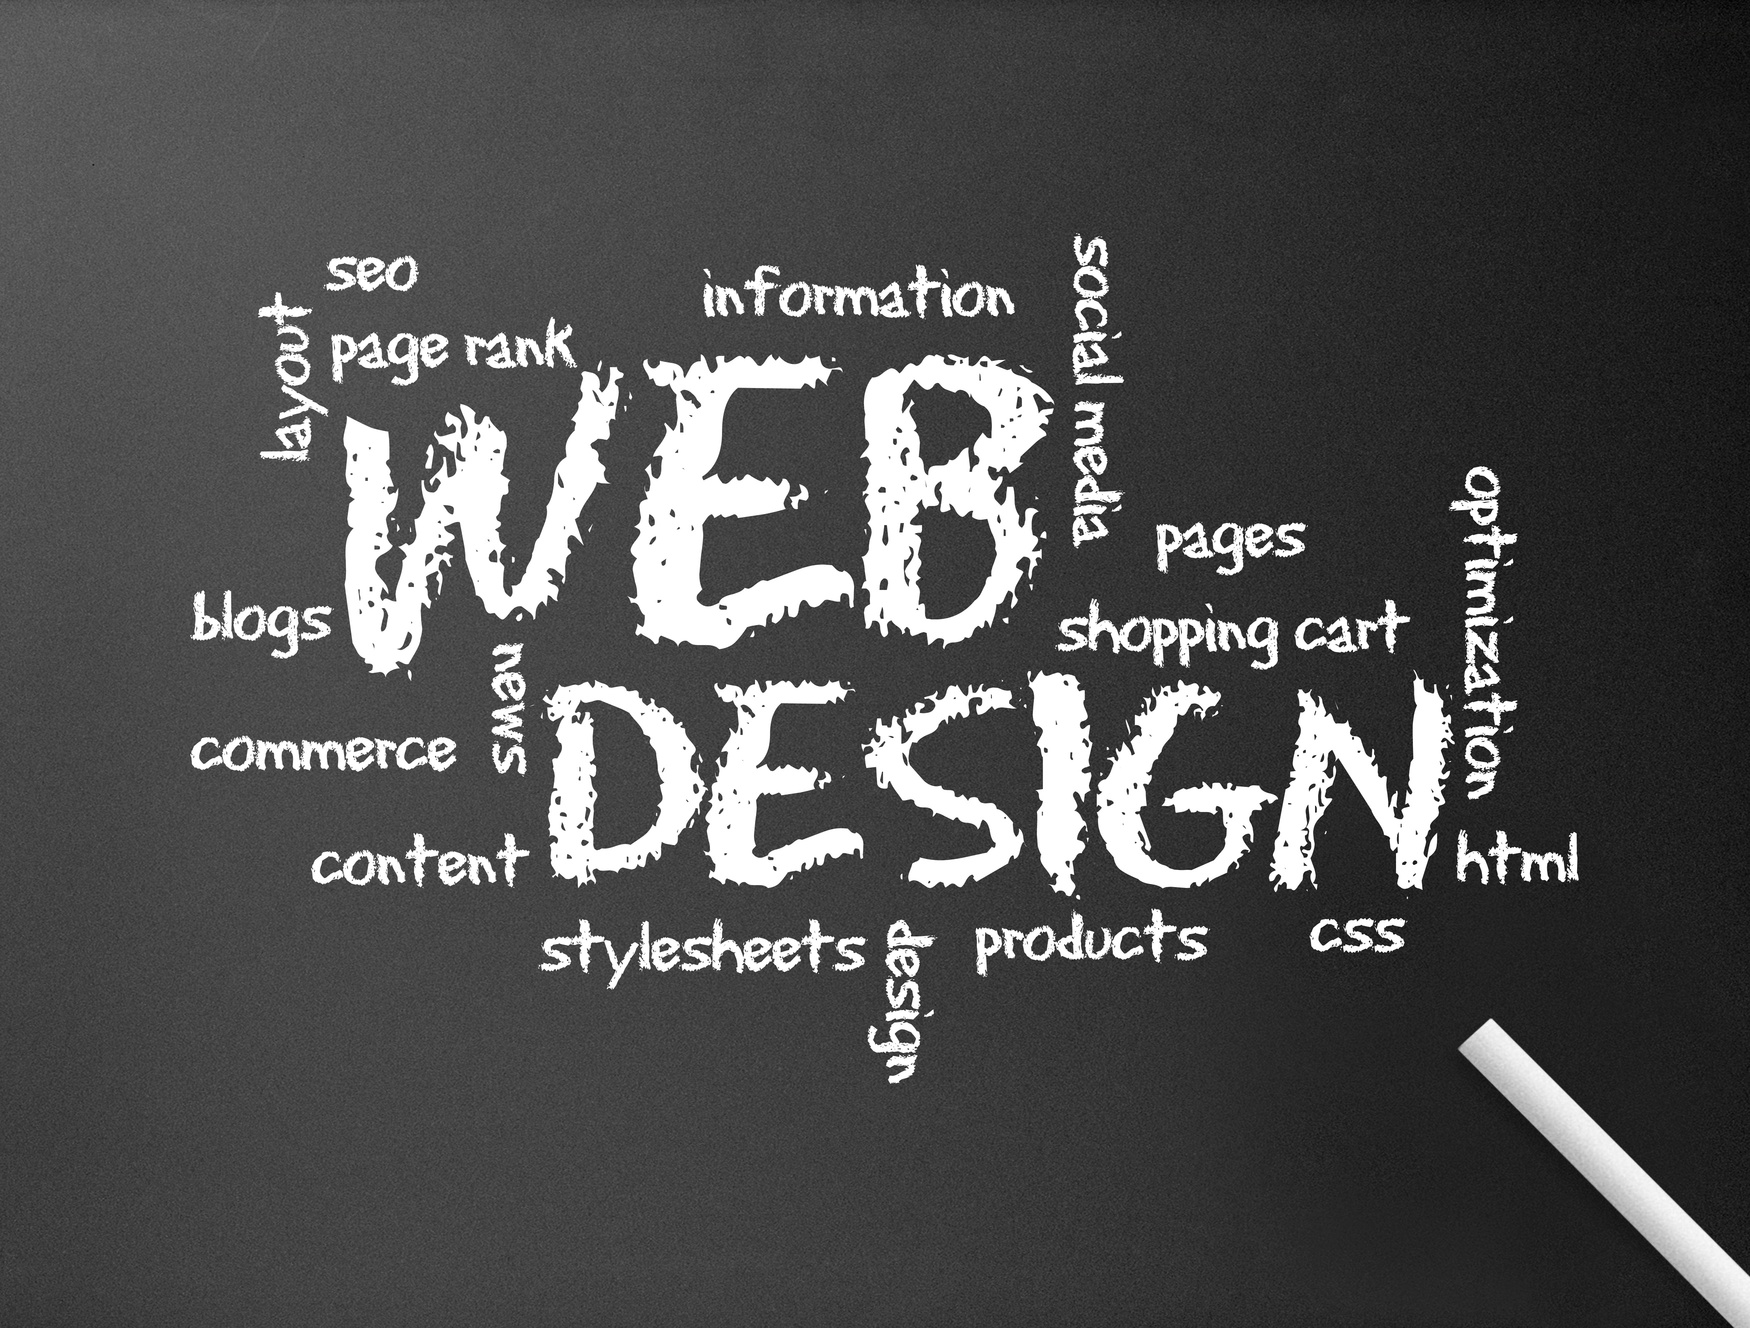 Ask Your Web Designer in Santa Rosa, CA to Implement These Tips for Increased Traffic